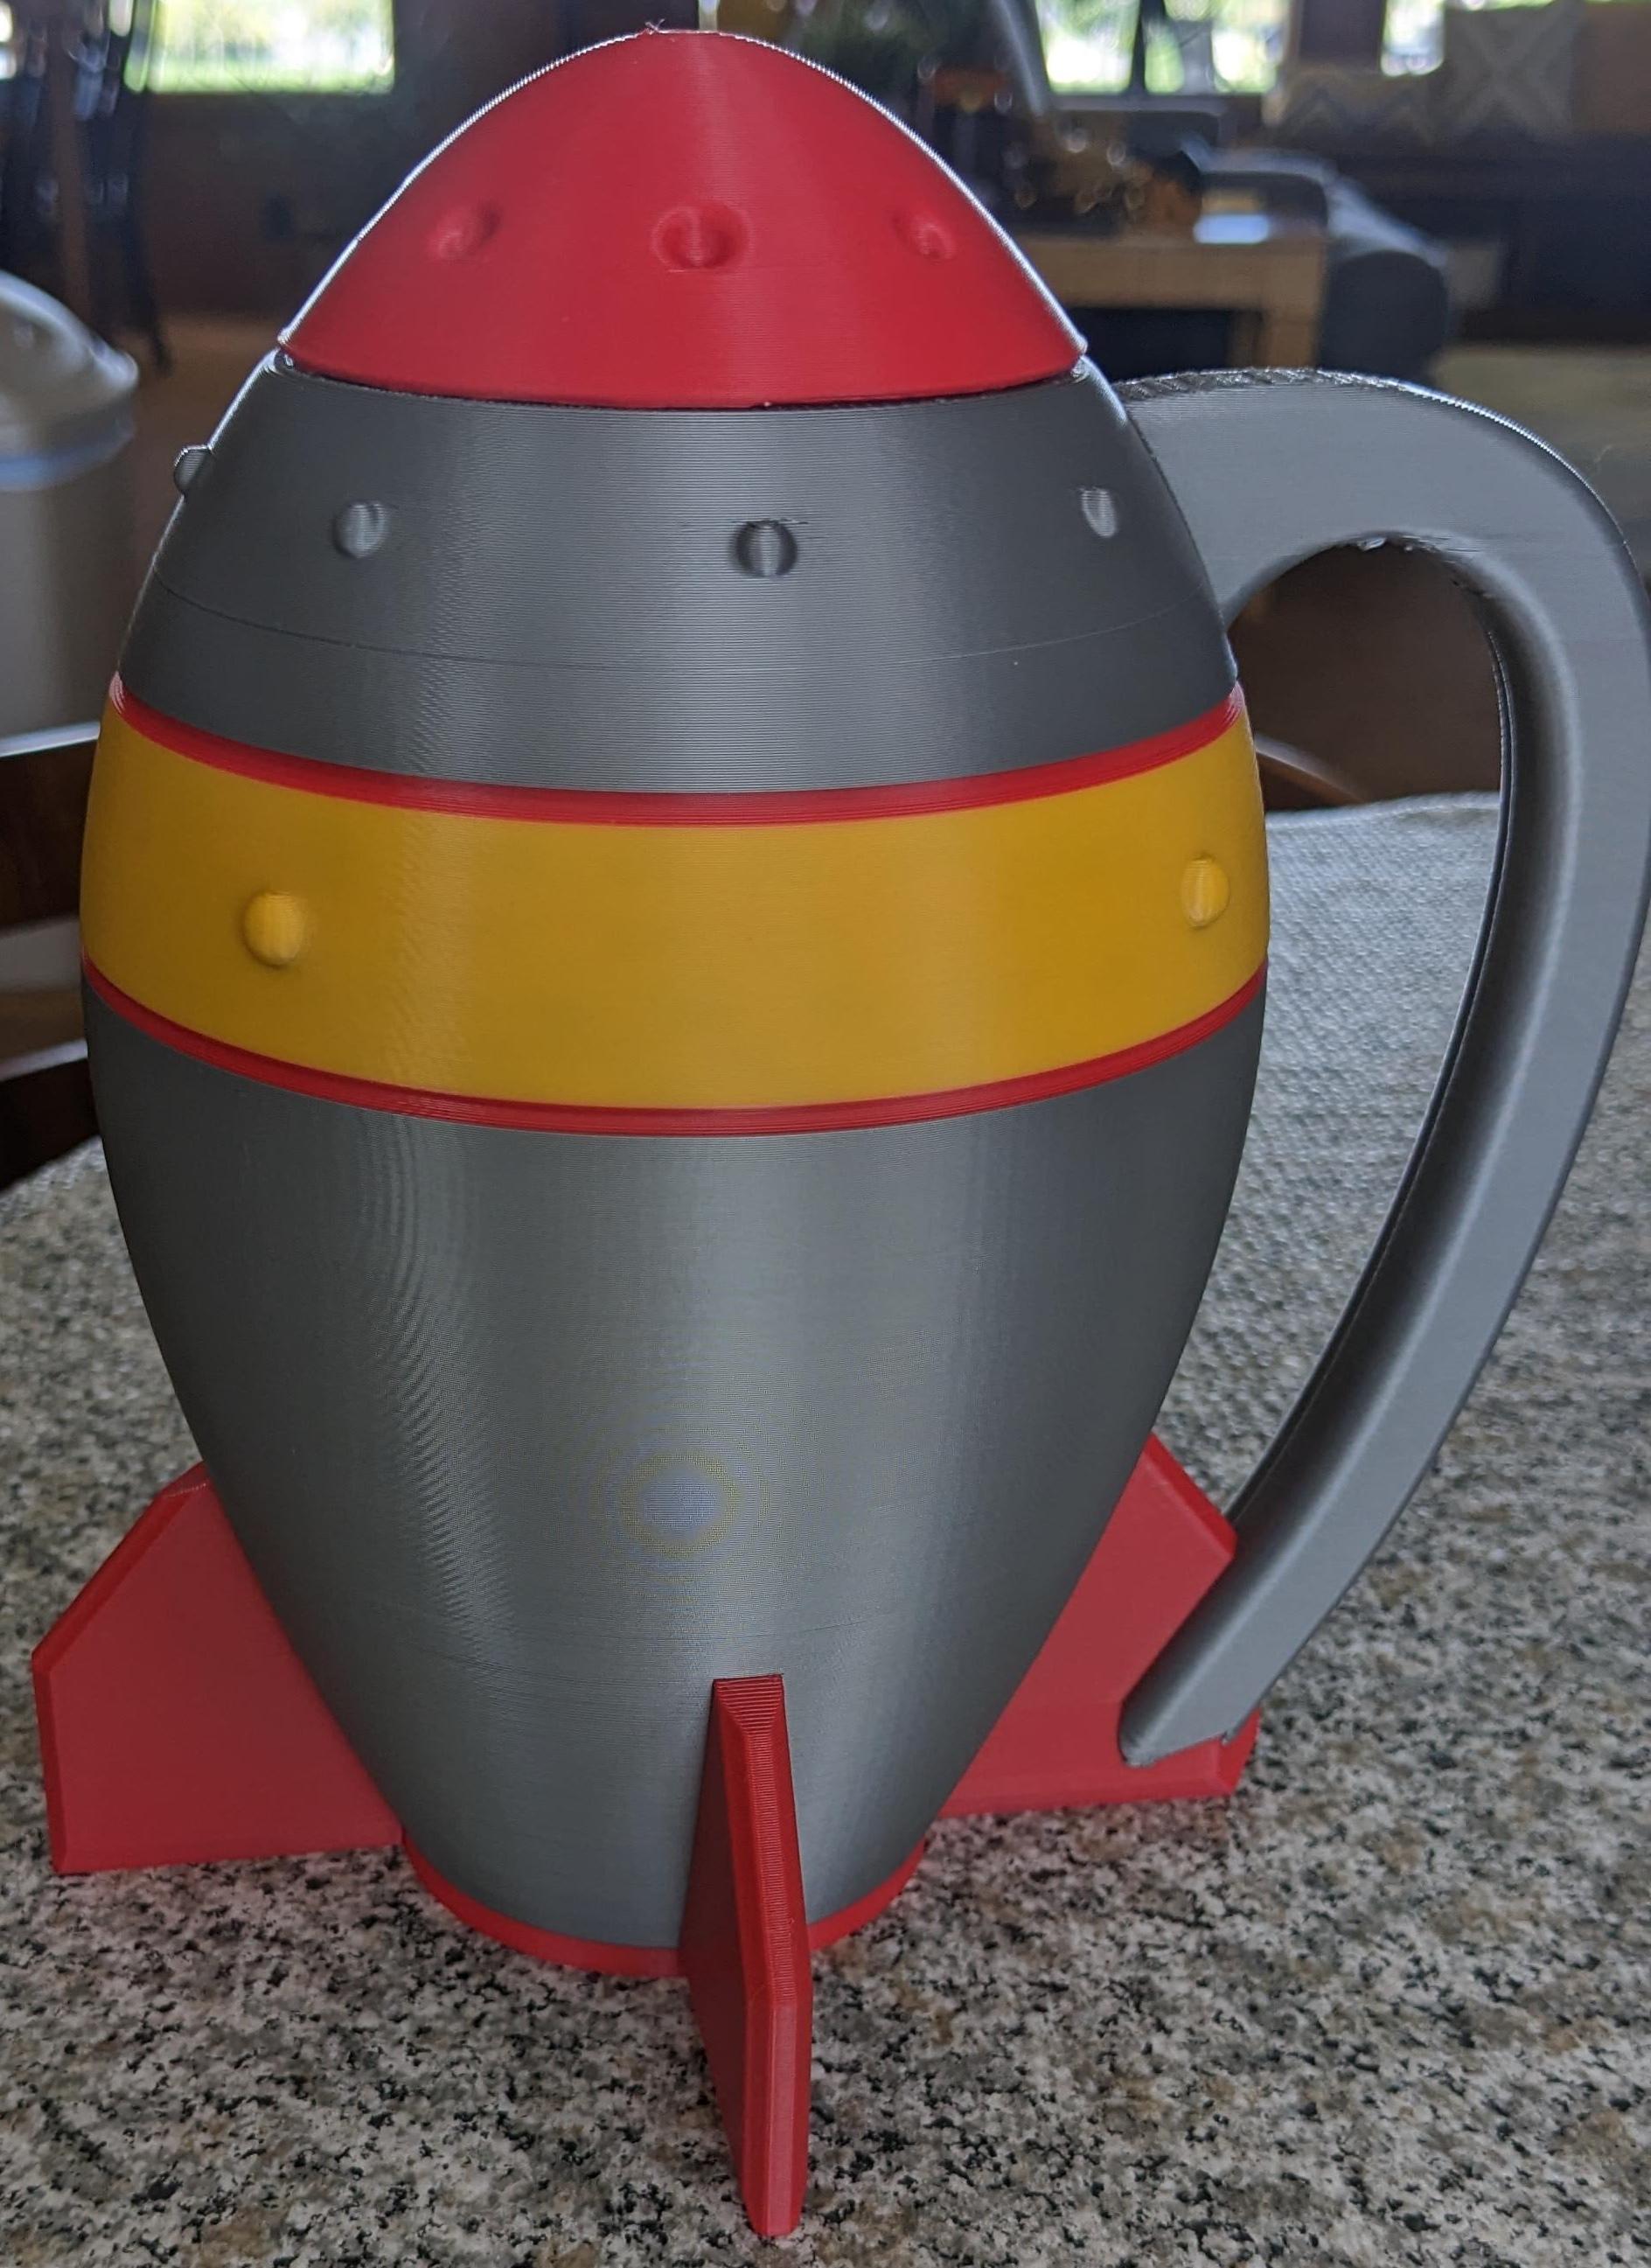 12oz Mini Nuke - Fallout 4 Can Cup! - A few minor modifications to separate out key elements and then apply the ol' ERCF!! - 3d model